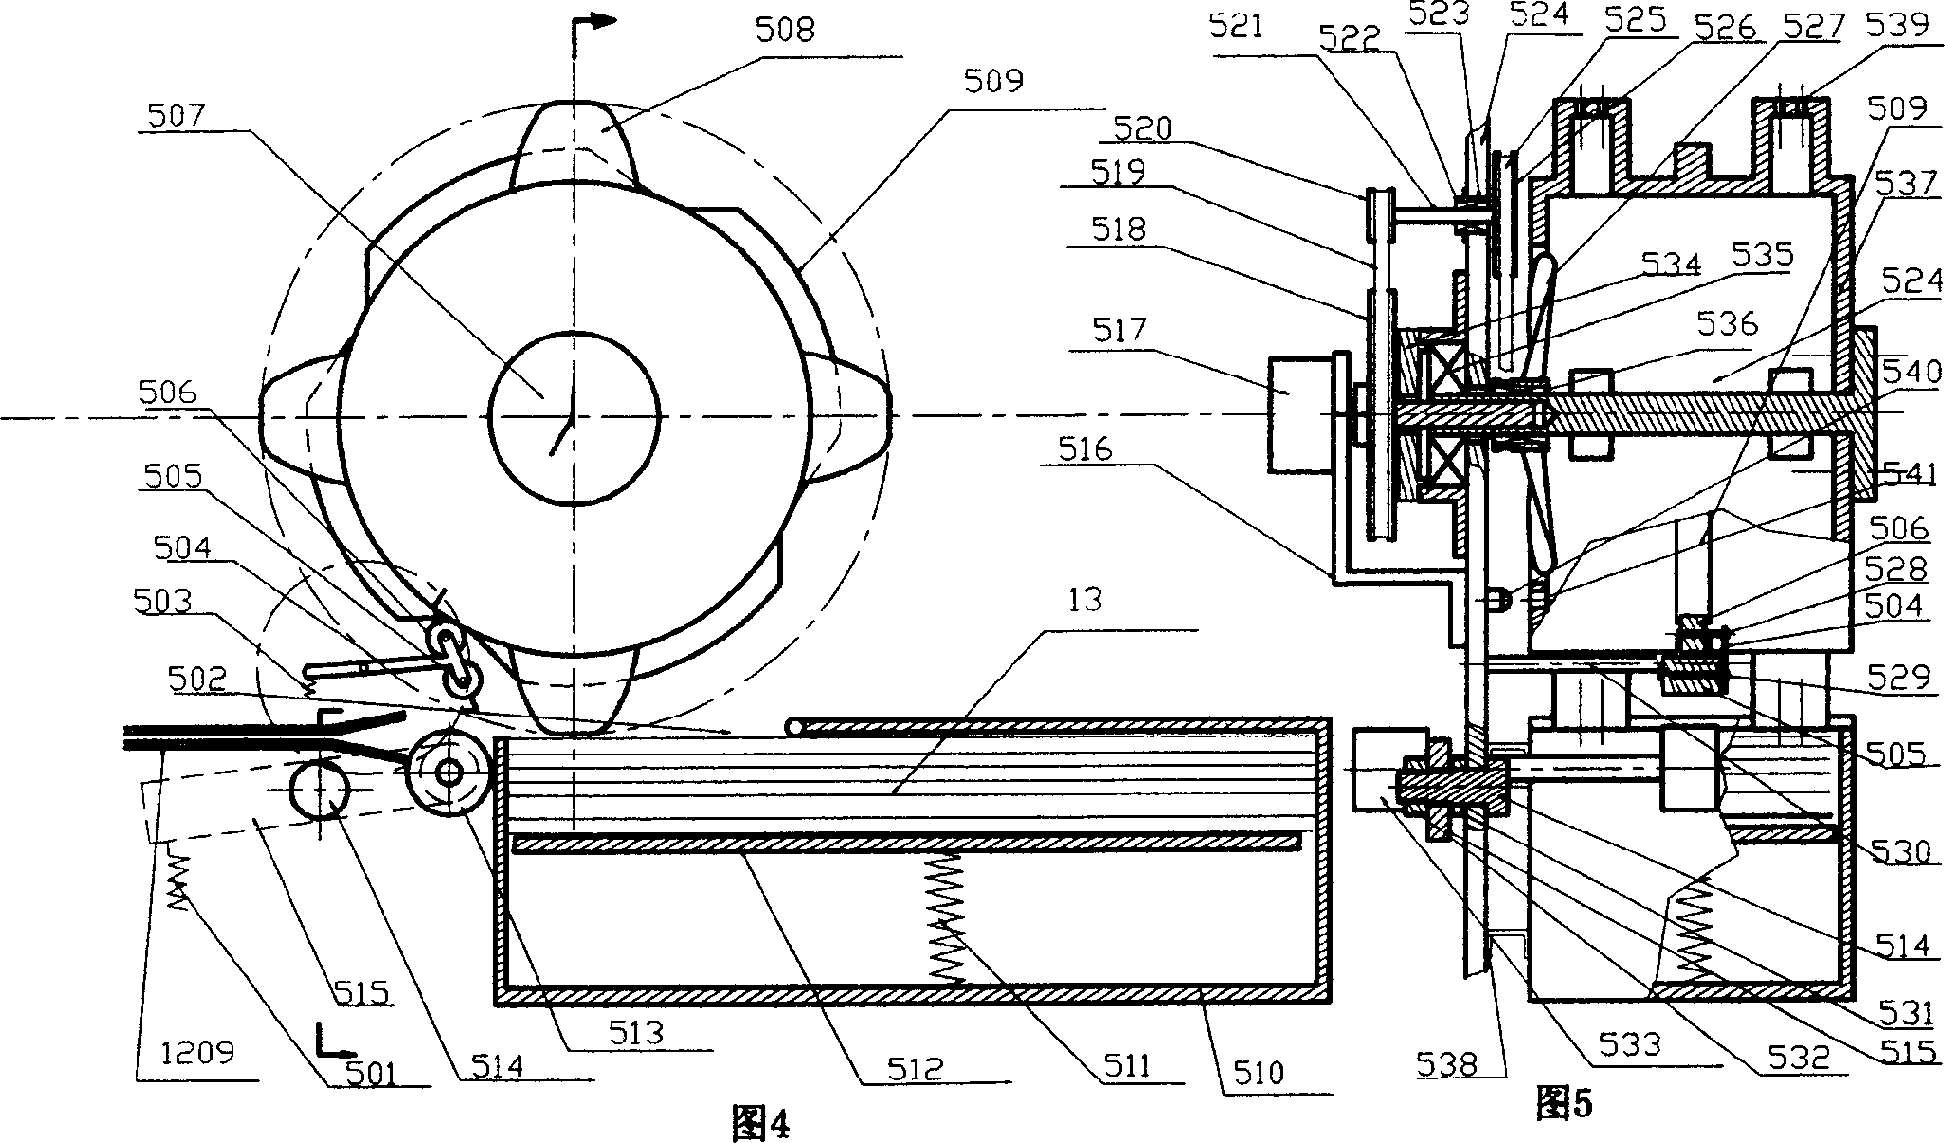 Self-supporting bank check selling device